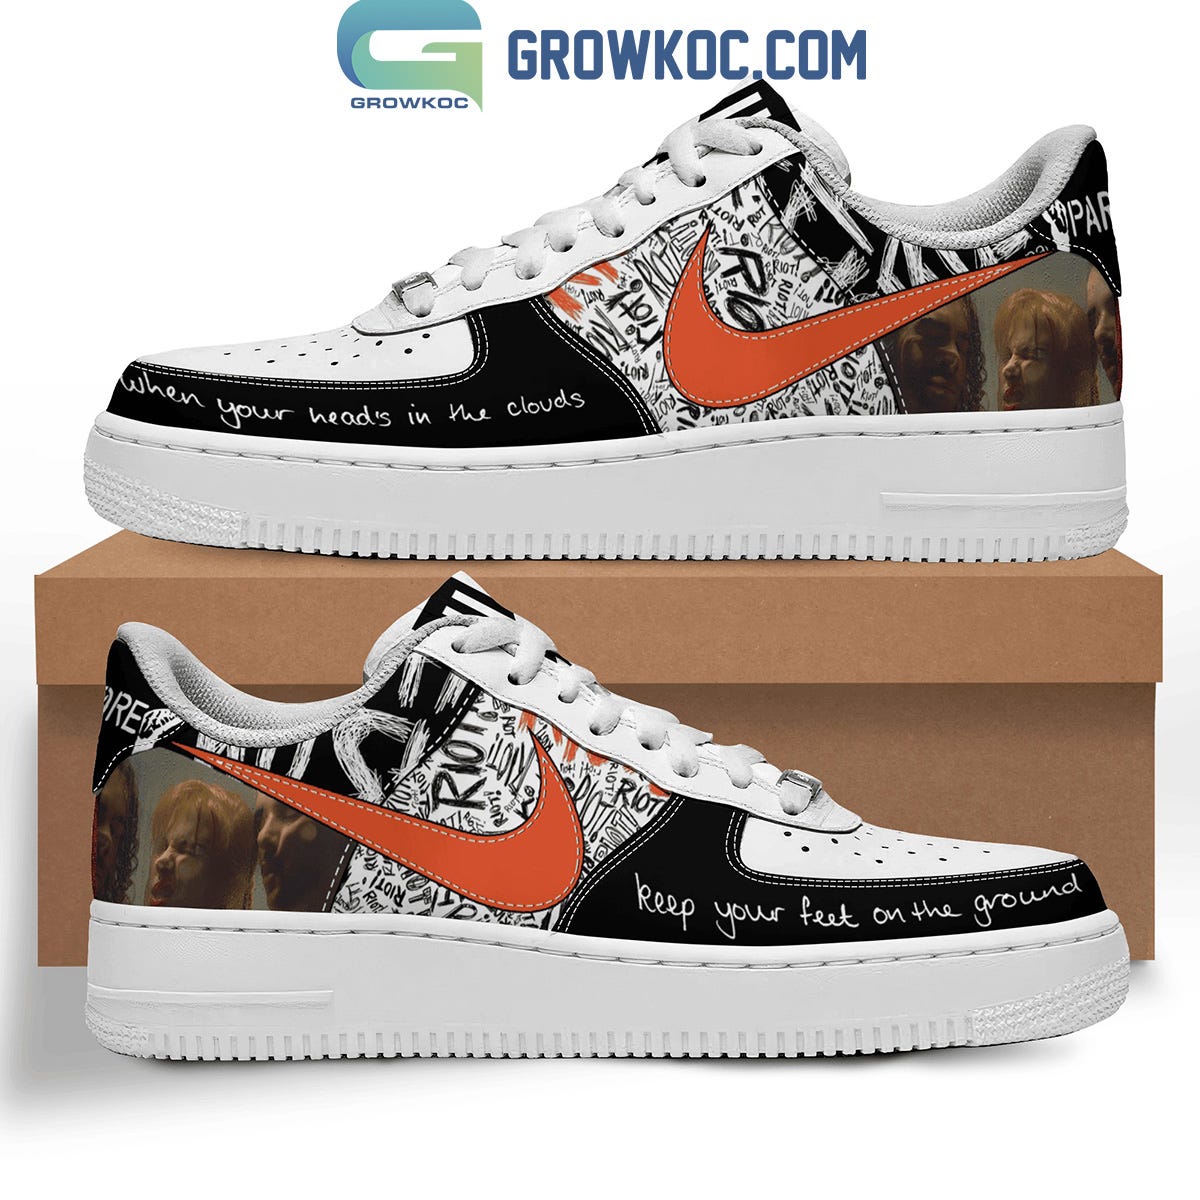 Paramore Keep Your Feet On The Ground Air Force 1 Shoes | by Growkoc ...